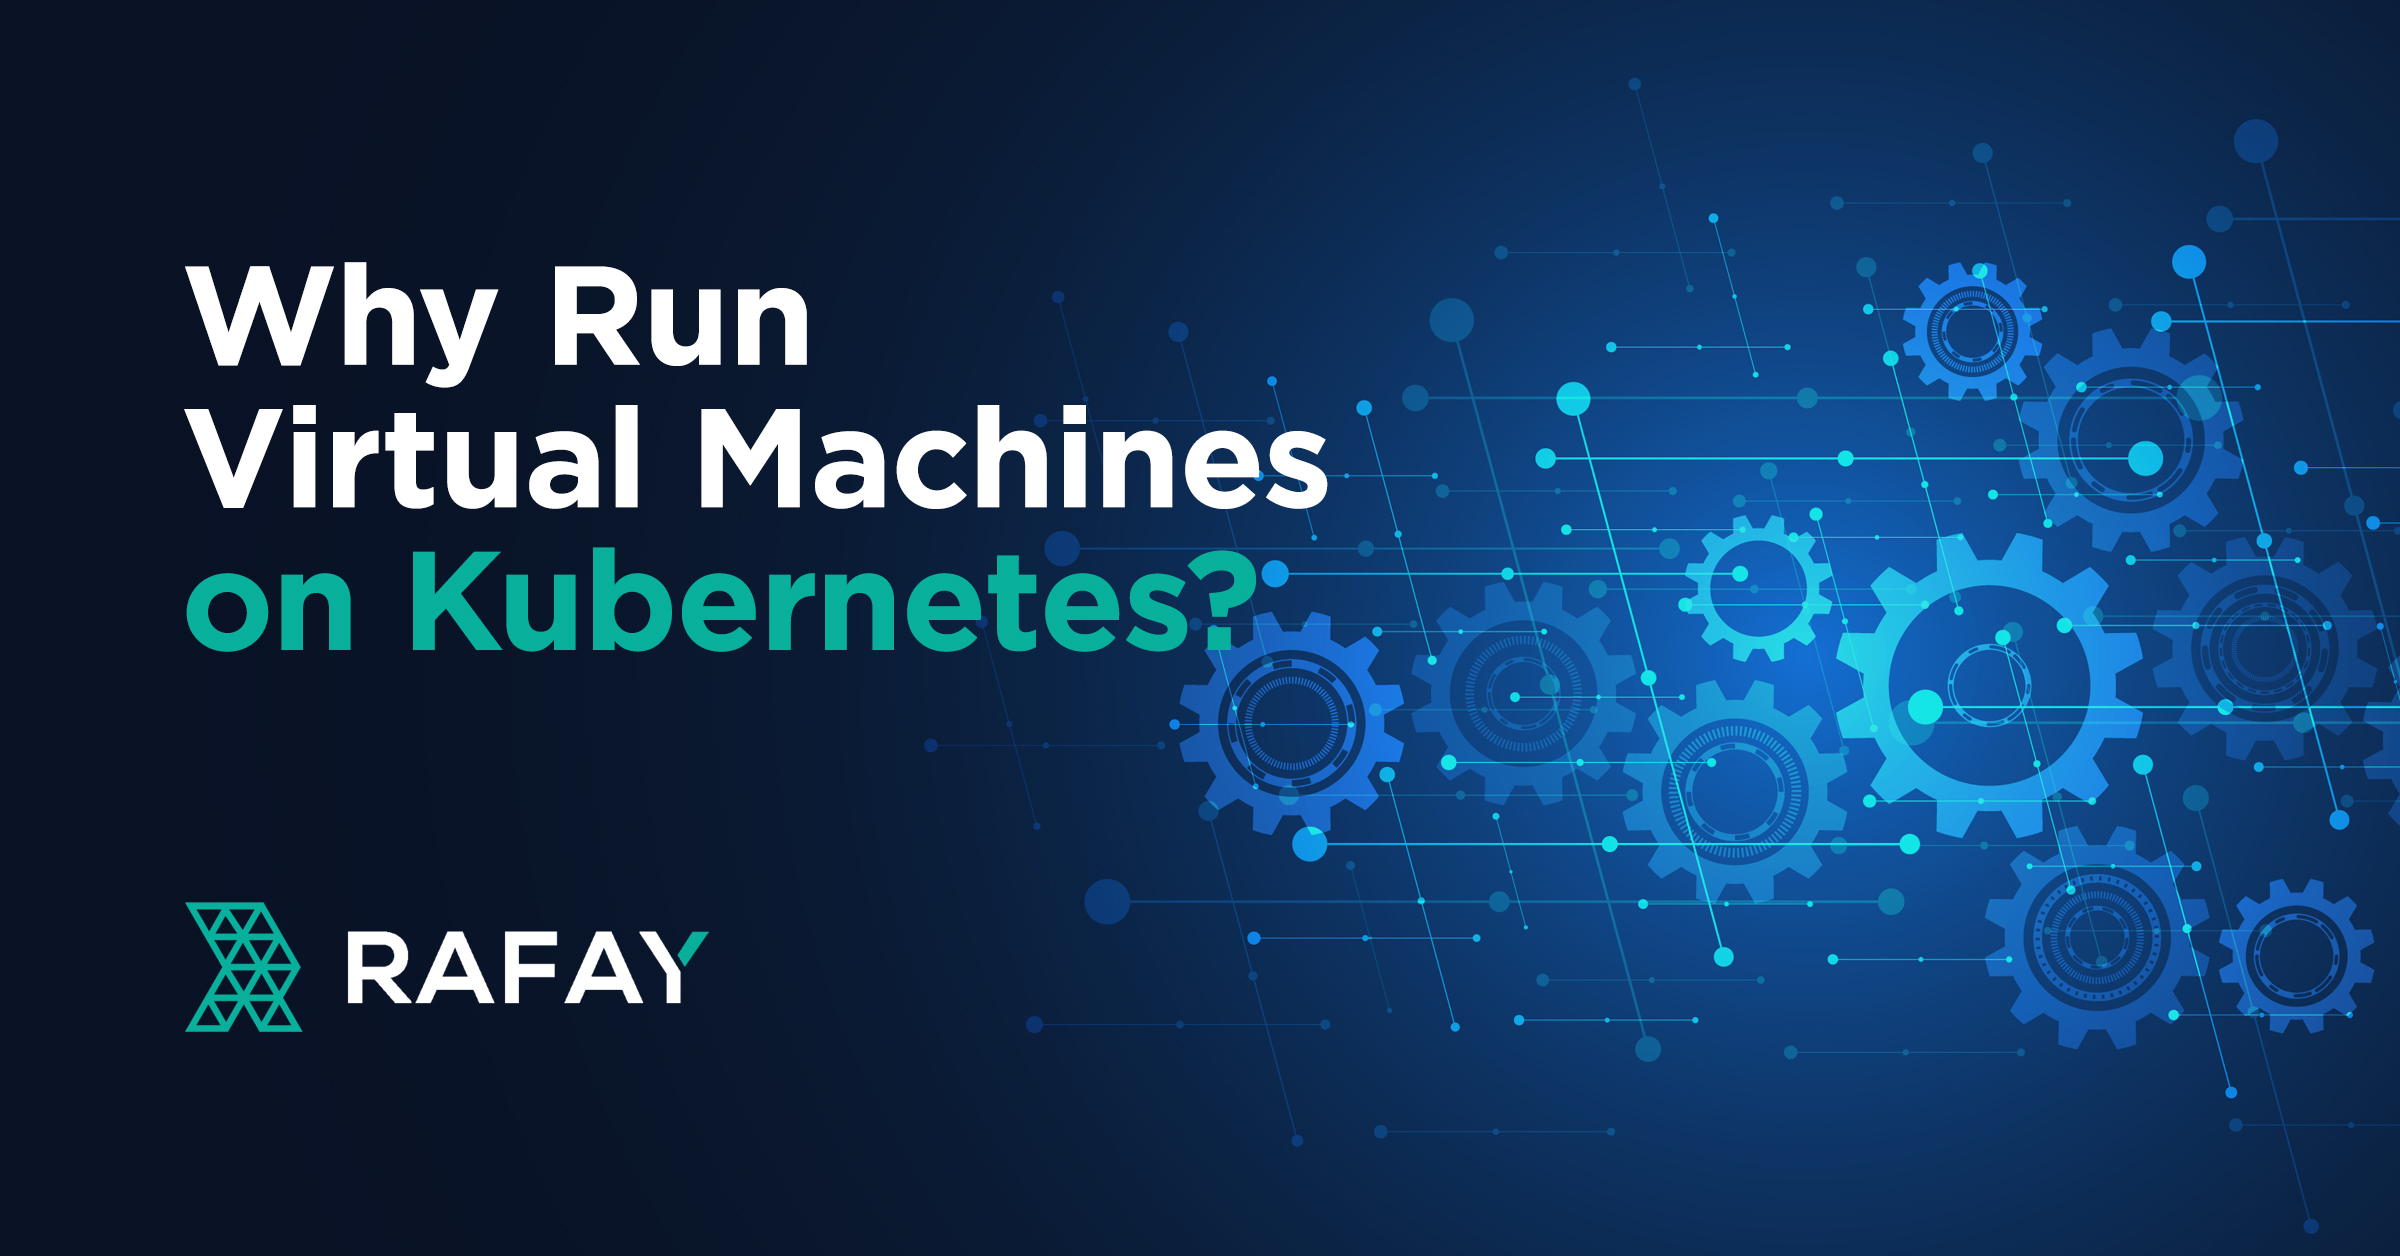 Image for Why Run Virtual Machines on Kubernetes?